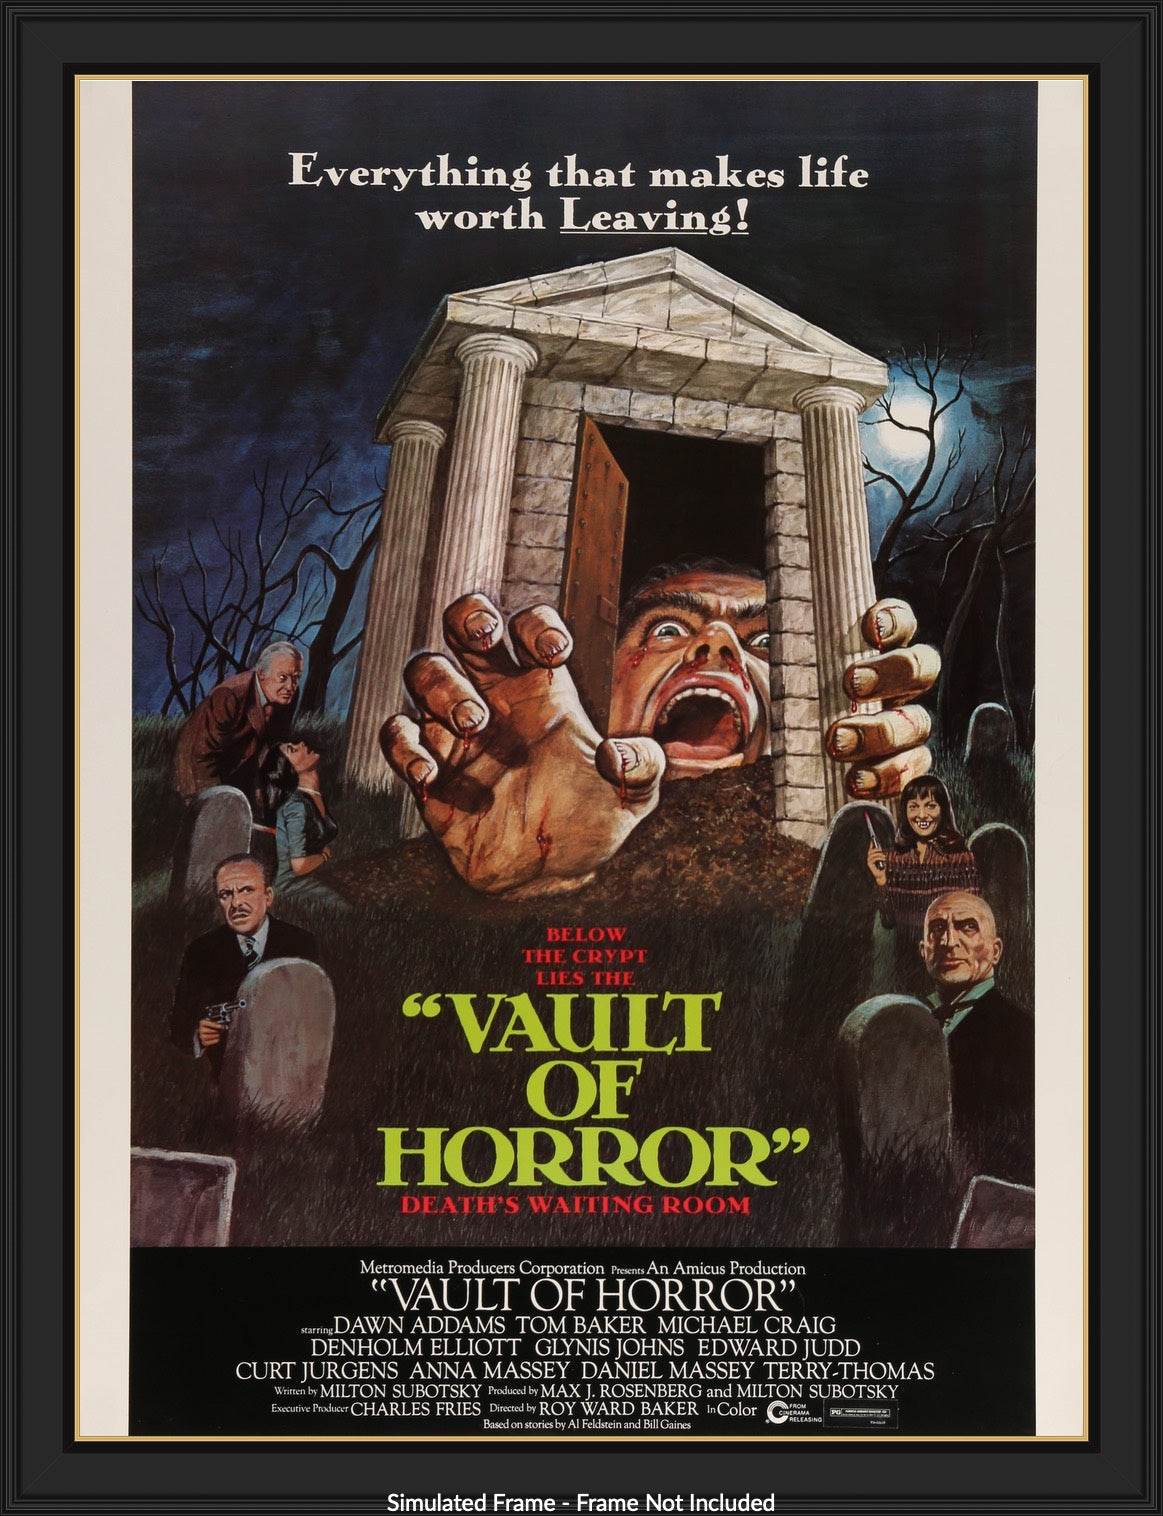 Horror Movie Poster of the Day Archives - Cultsploitation